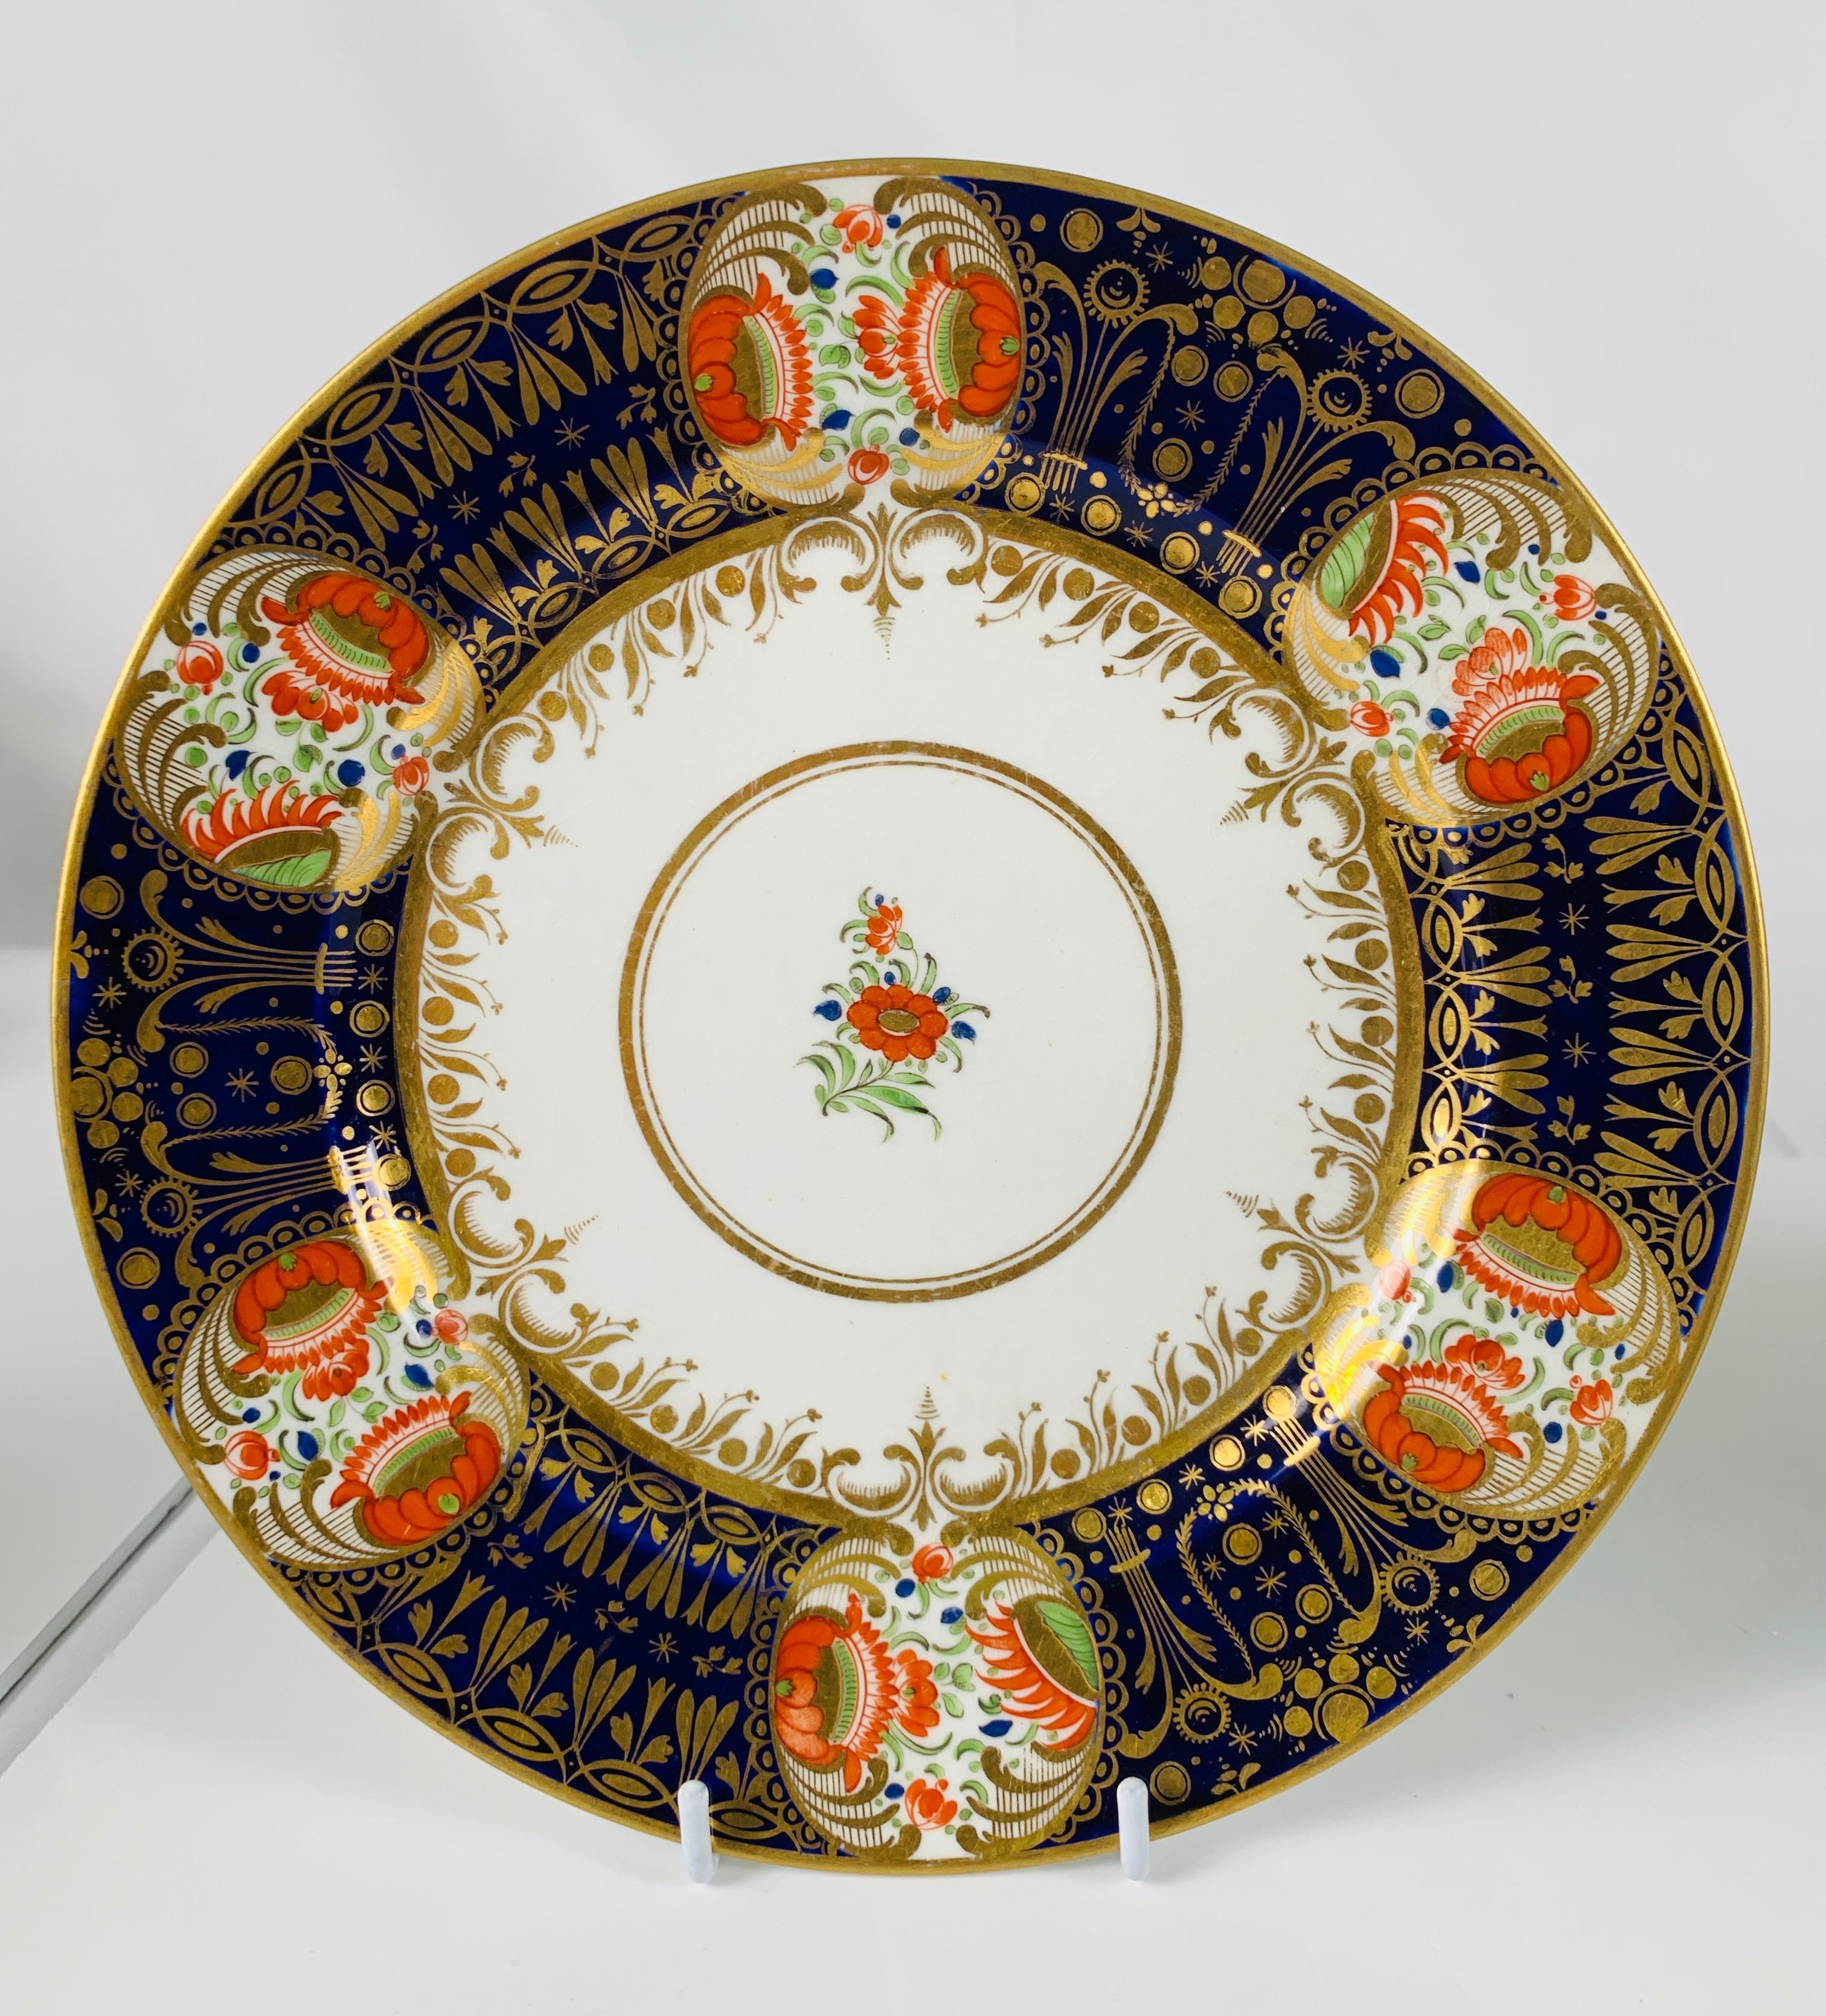 Provenance: The Private Collection of Mario Buatta
Mario loved beautiful color combinations on porcelains.
Made by Chamberlains Worcester circa 1810 these three Dejeuney pattern dishes have borders painted with a deep cobalt blue ground which is